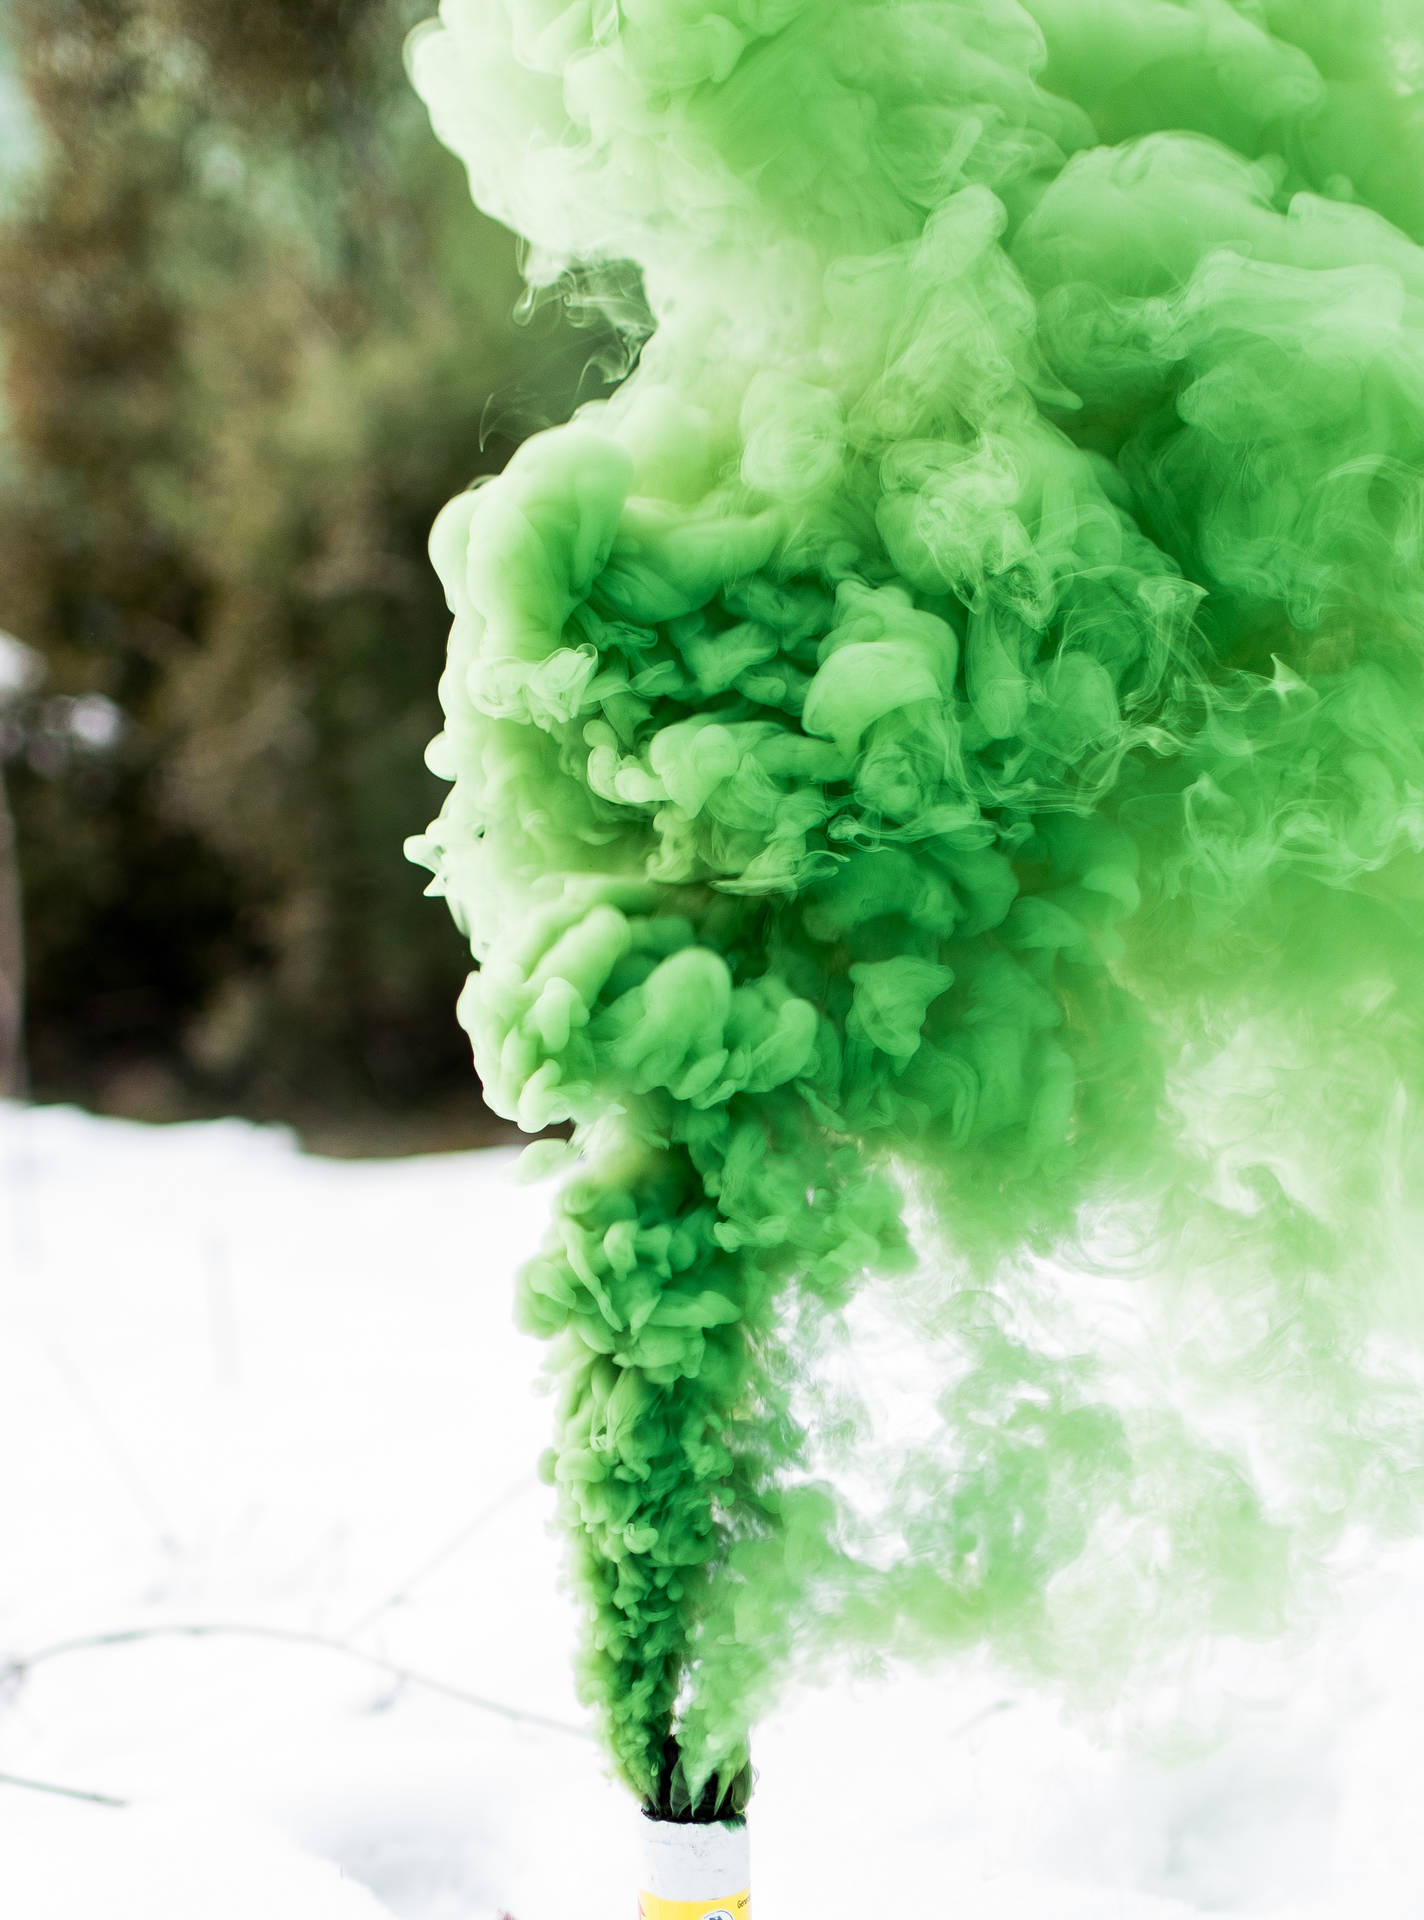 Send a Message for Help with the Green Smoke Signal Wallpaper